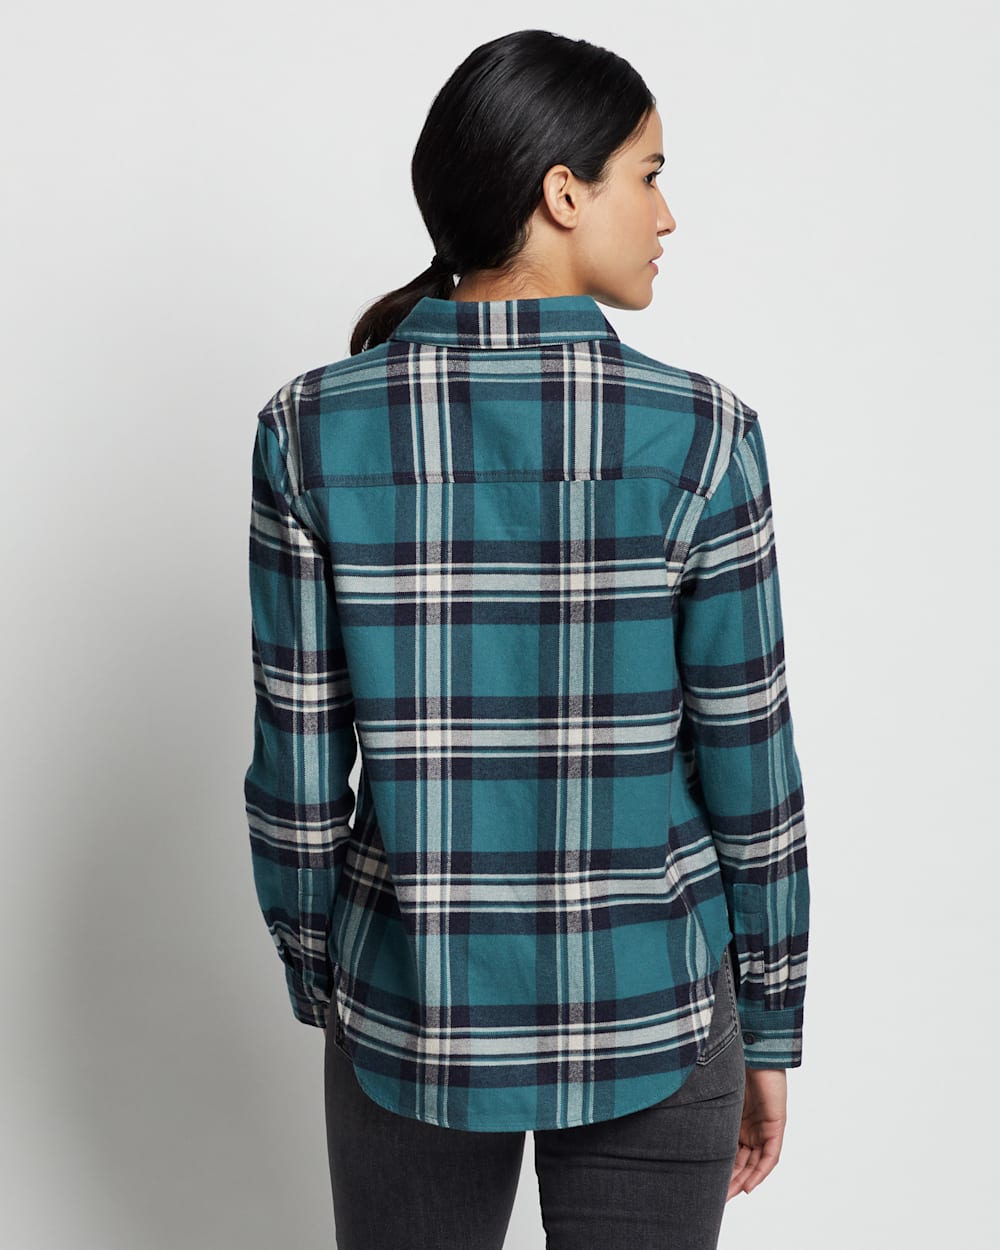 ALTERNATE VIEW OF WOMEN'S BOYFRIEND DOUBLEBRUSHED FLANNEL SHIRT IN BALSAM/IVORY PLAID image number 5